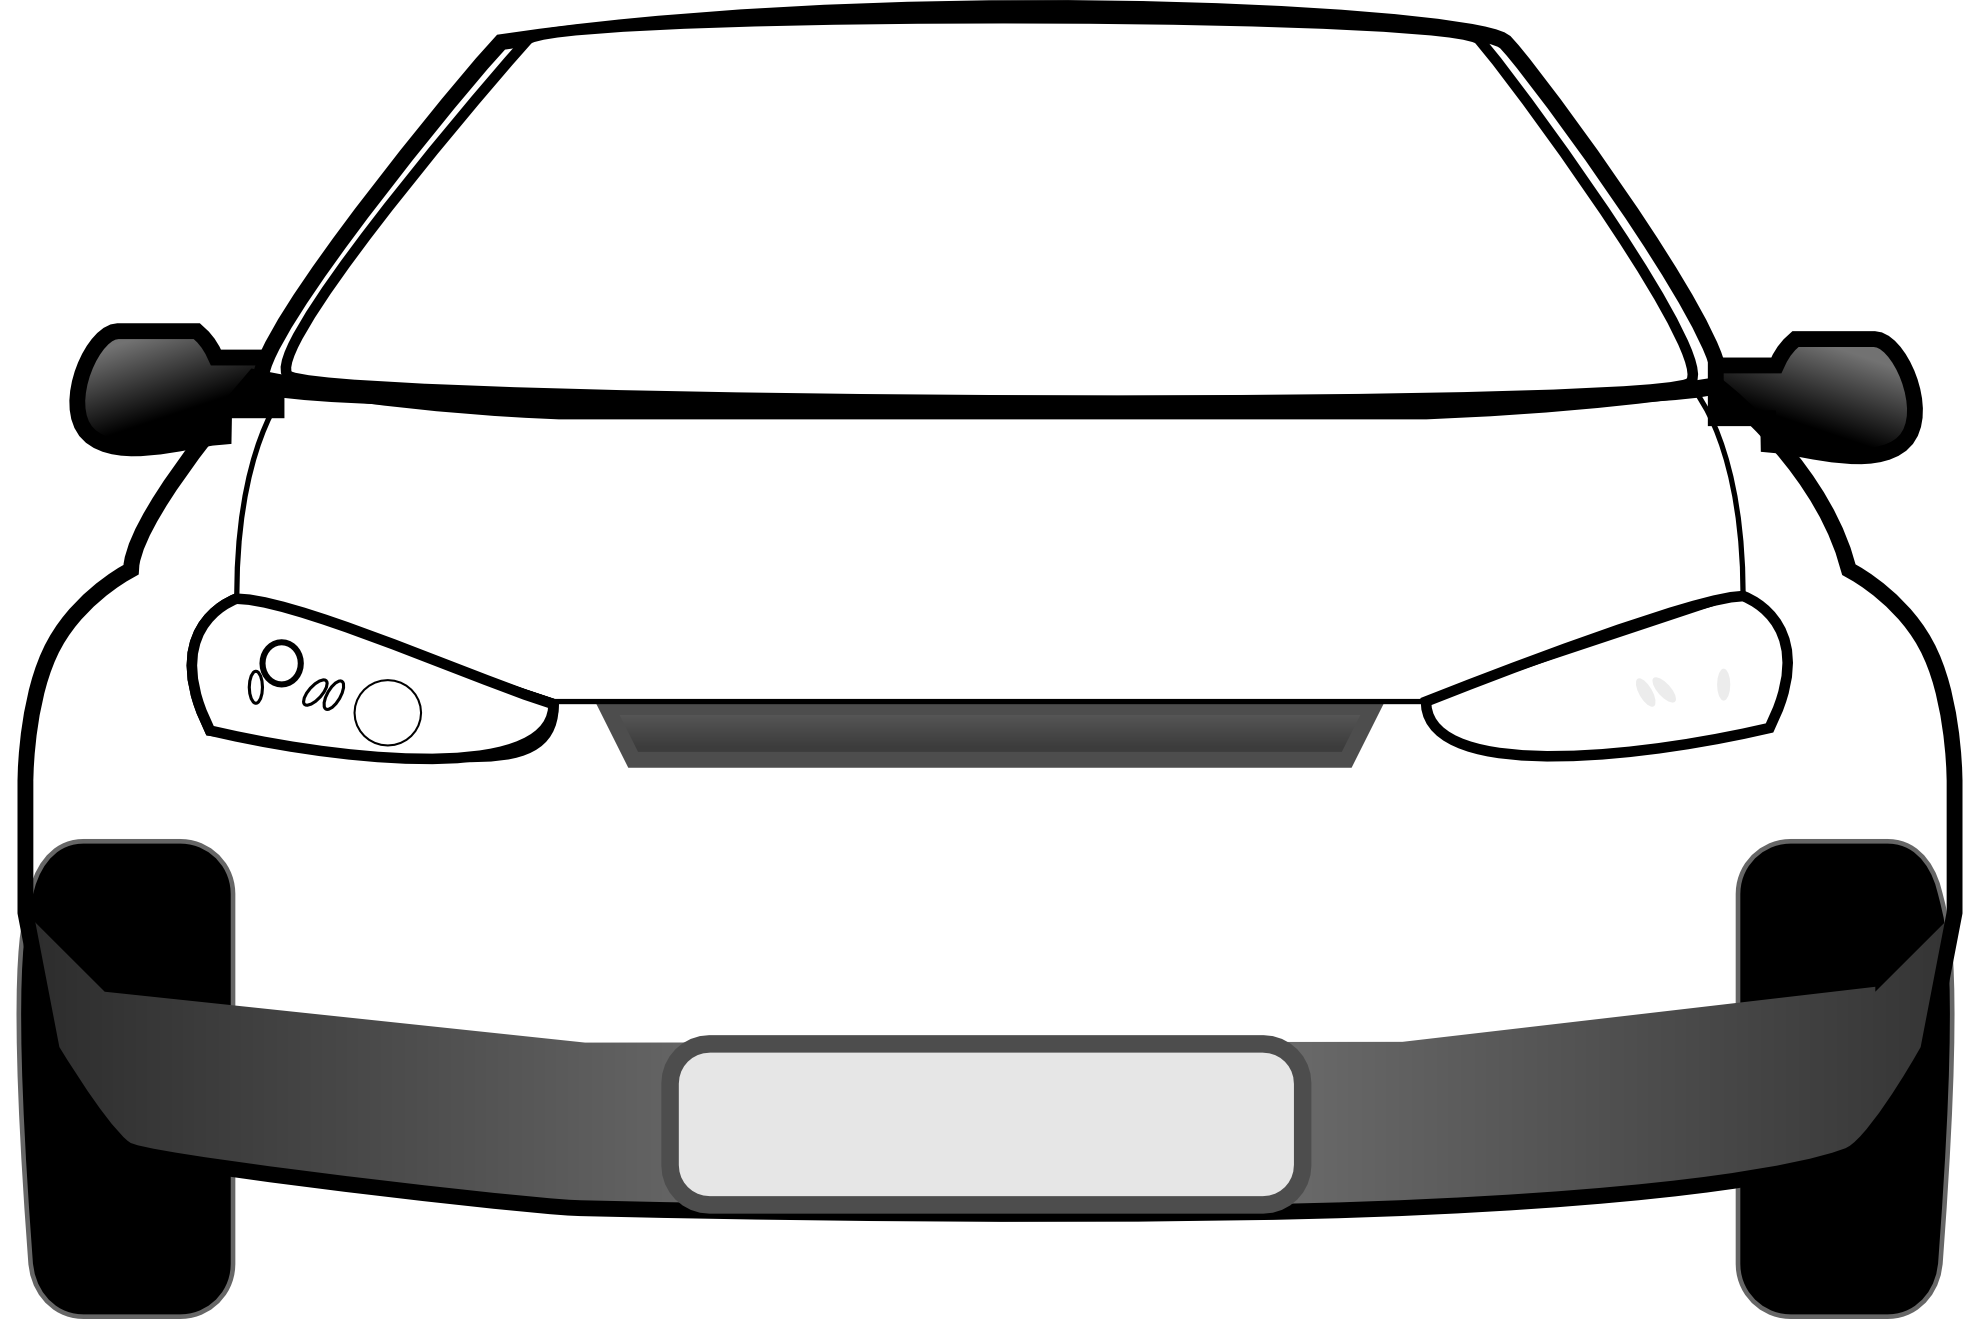 Car Clipart Black And White | Clipart Panda - Free Clipart Images